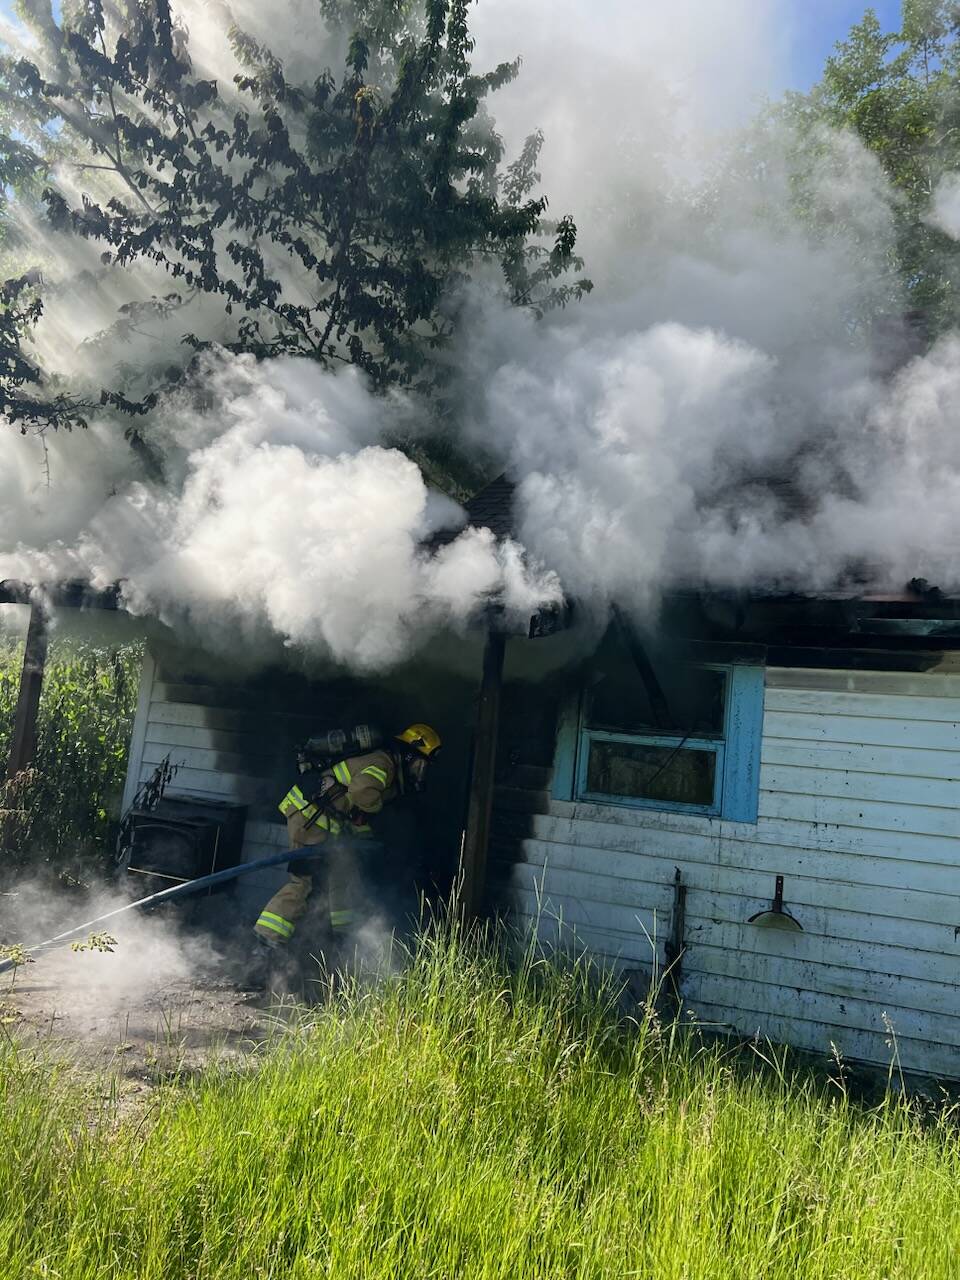 Photo provided
A house on South Whidbey caught fire Sunday morning.